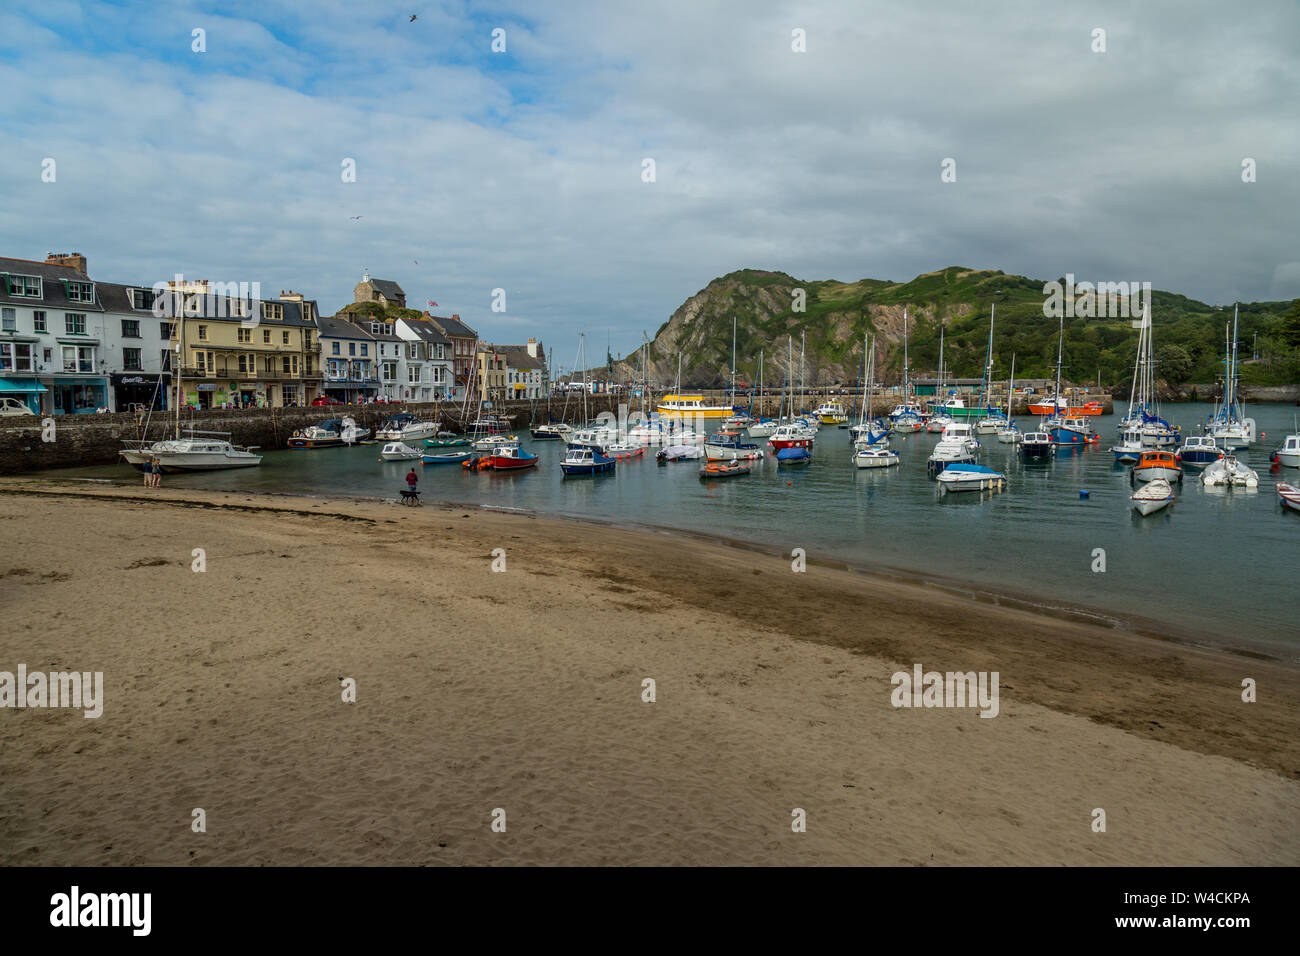 Th e town of Ilfracombe, on the north coast of Devon in England. Shows boats in the small harbour. Stock Photo